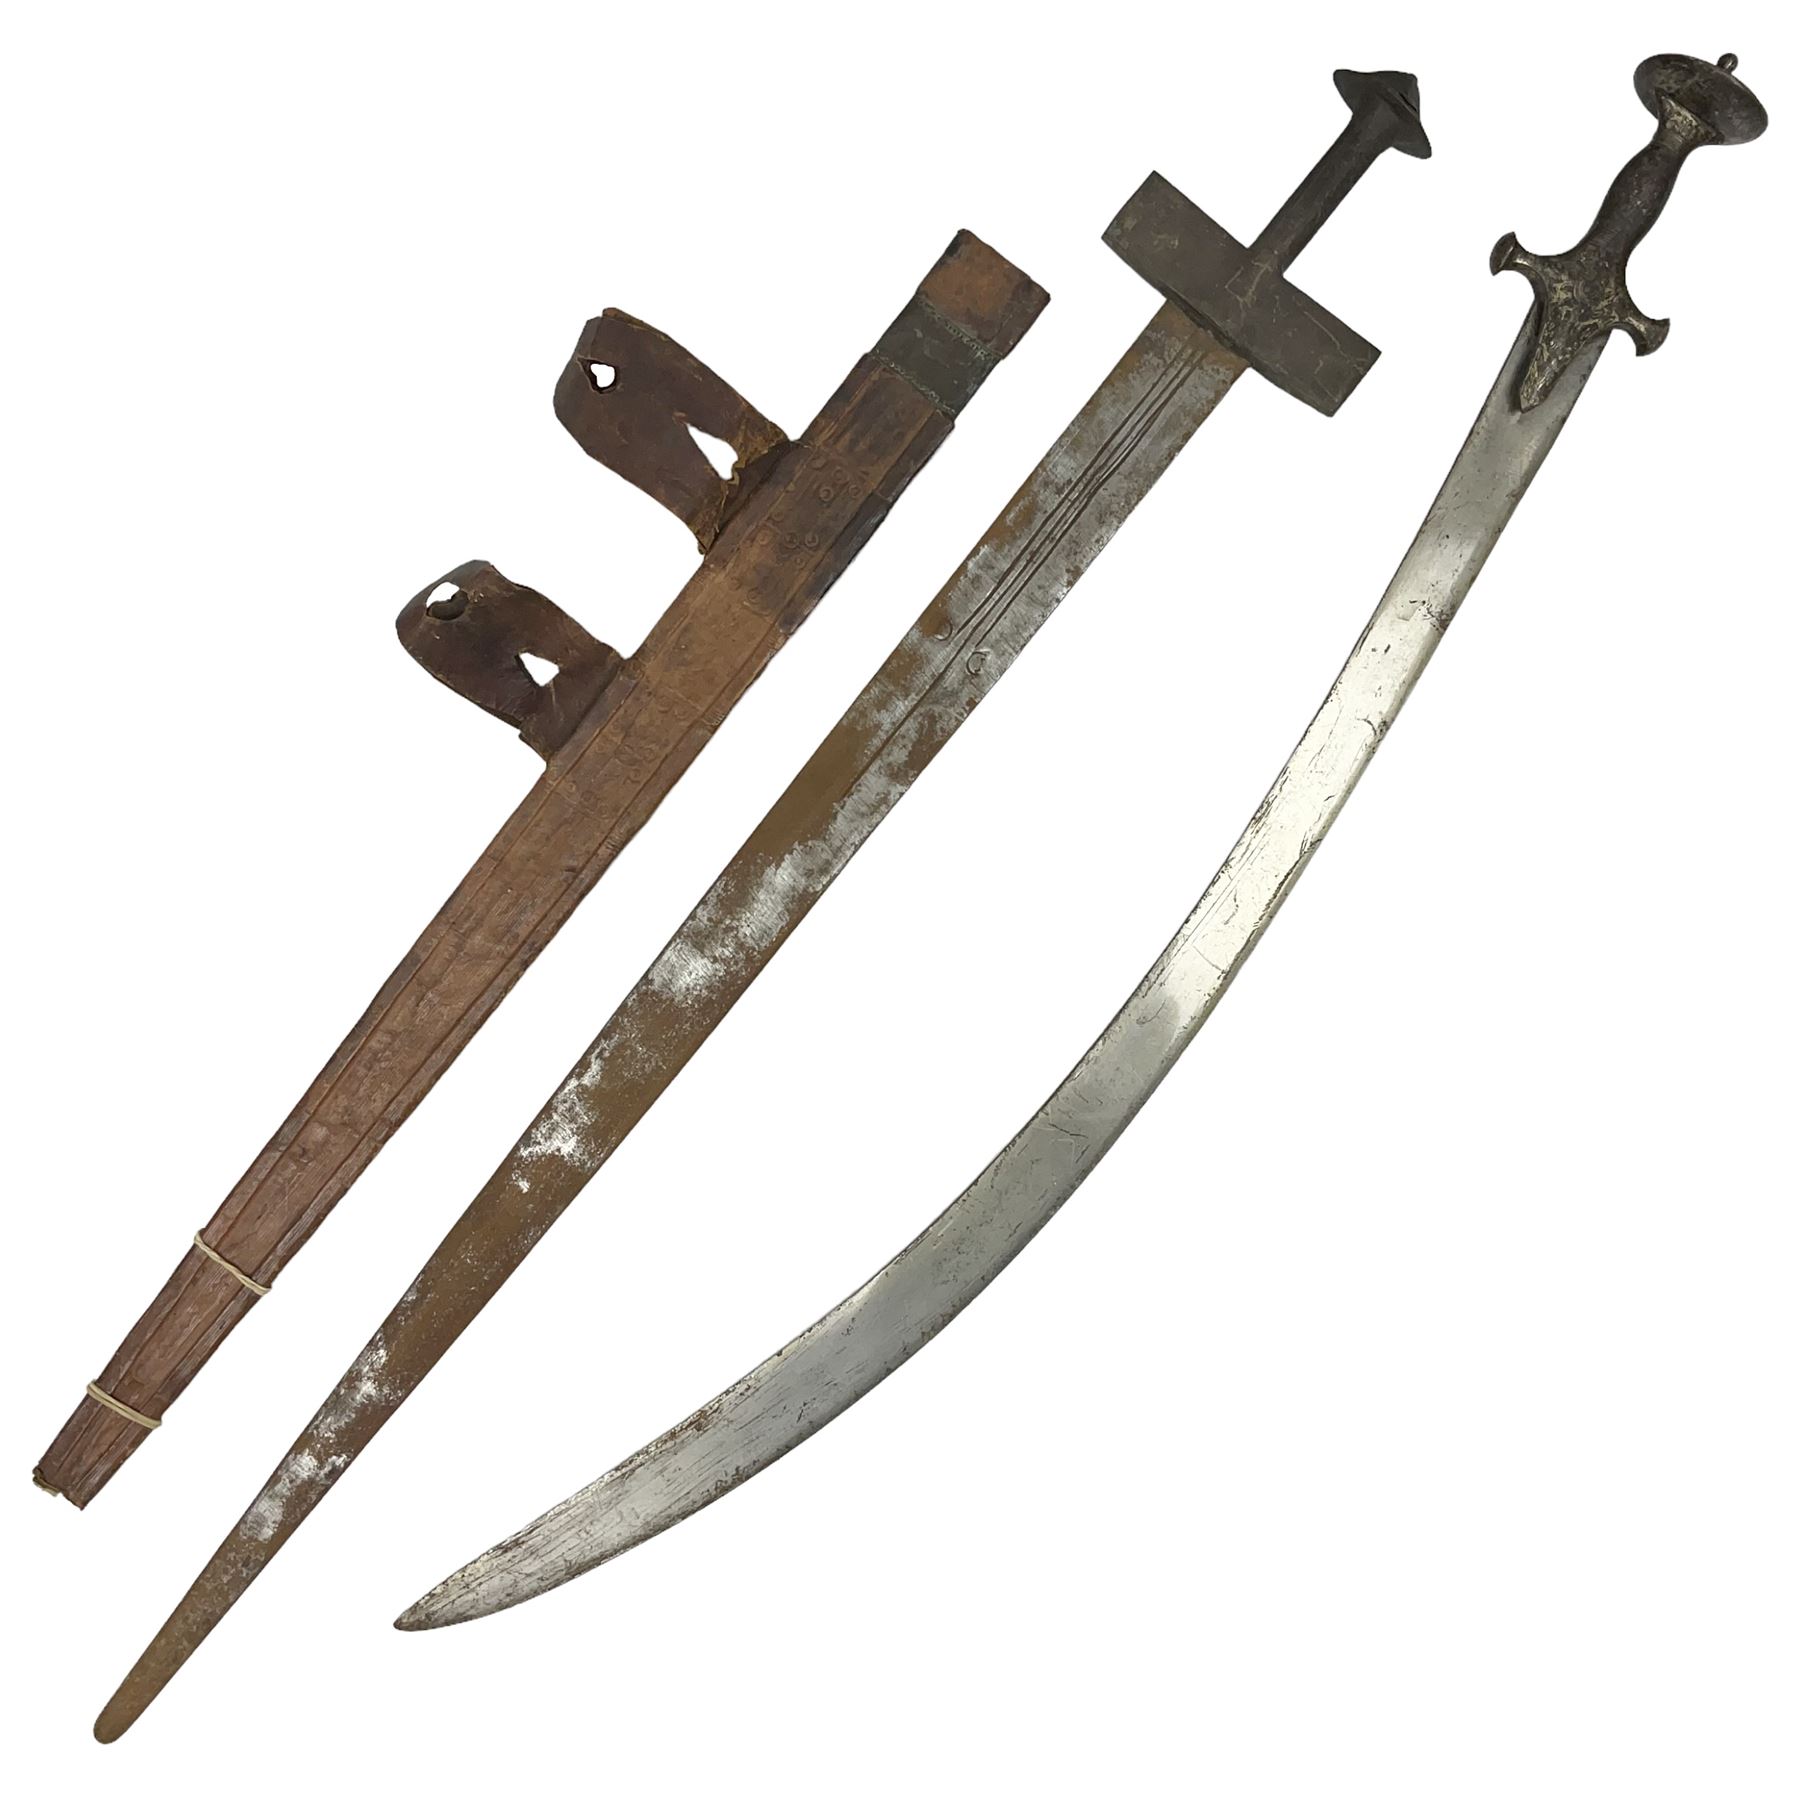 Sold at Auction: 9 IRON AGE VIKING DAGGER AND KNIFE BLADE LOT